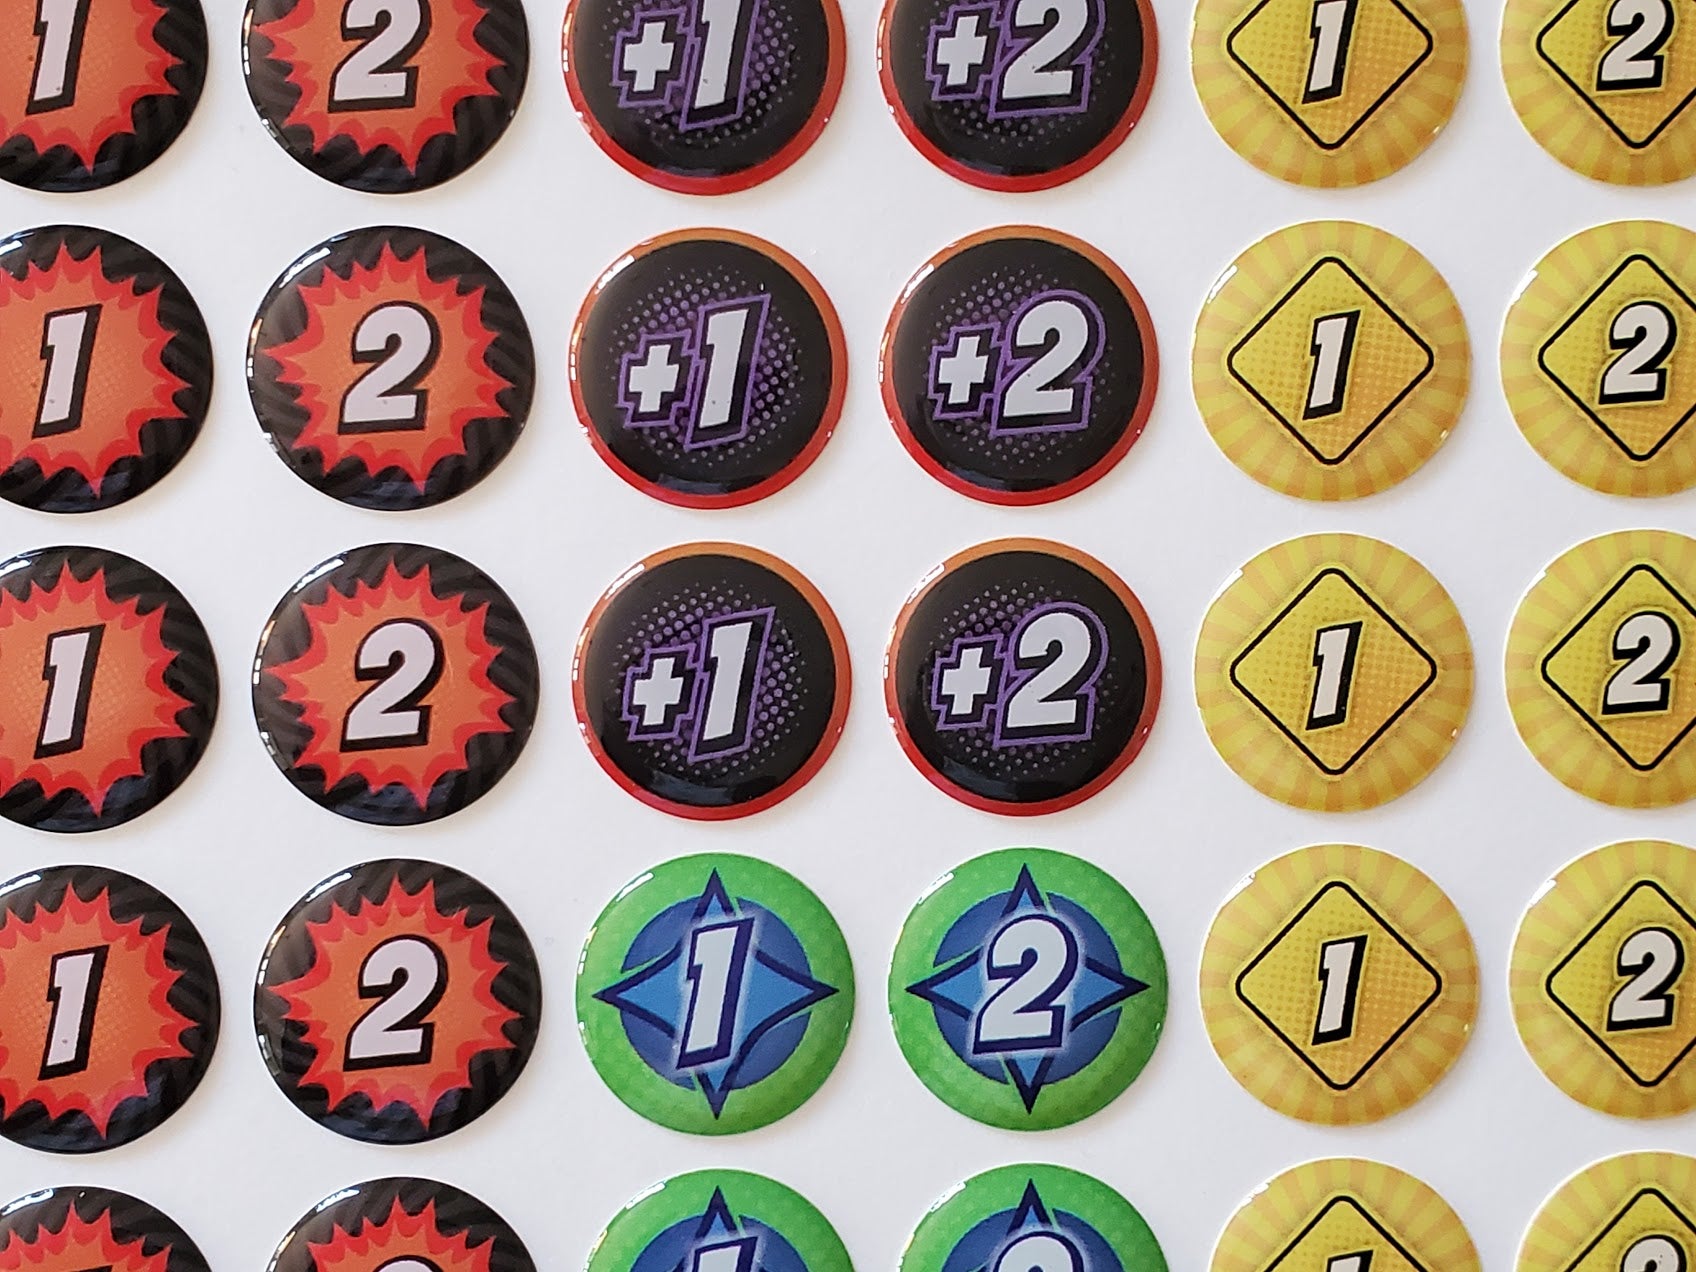 Marvel Champions The Card Game tokens. Damage Threat tokens. All